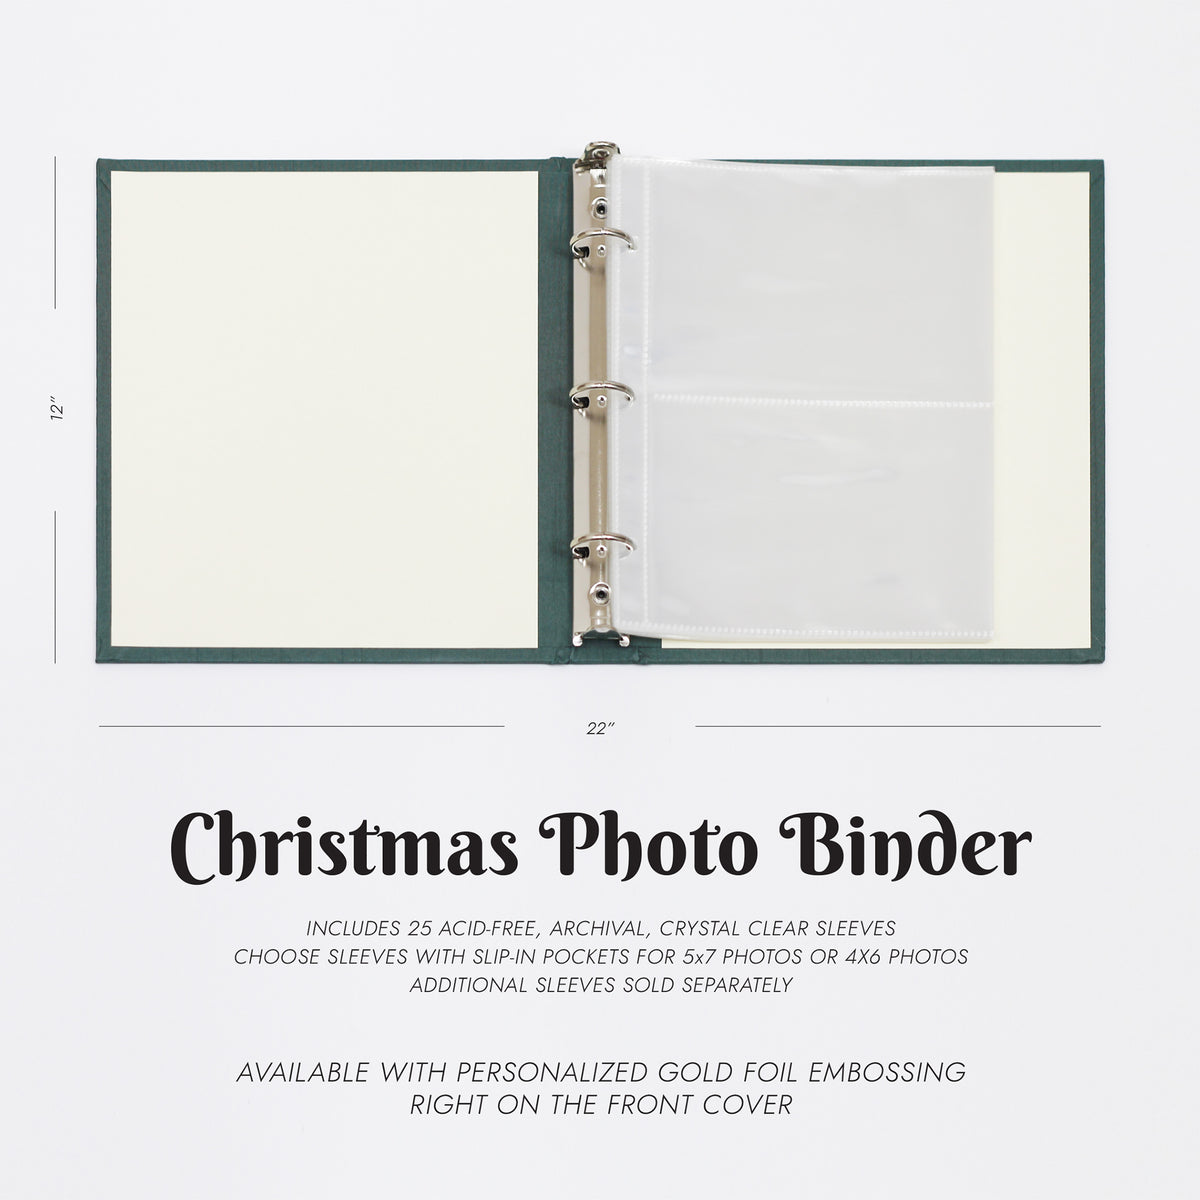 Large Christmas Photo Binder with Garnet Silk Cover for 4x6 or 5x7 Photos